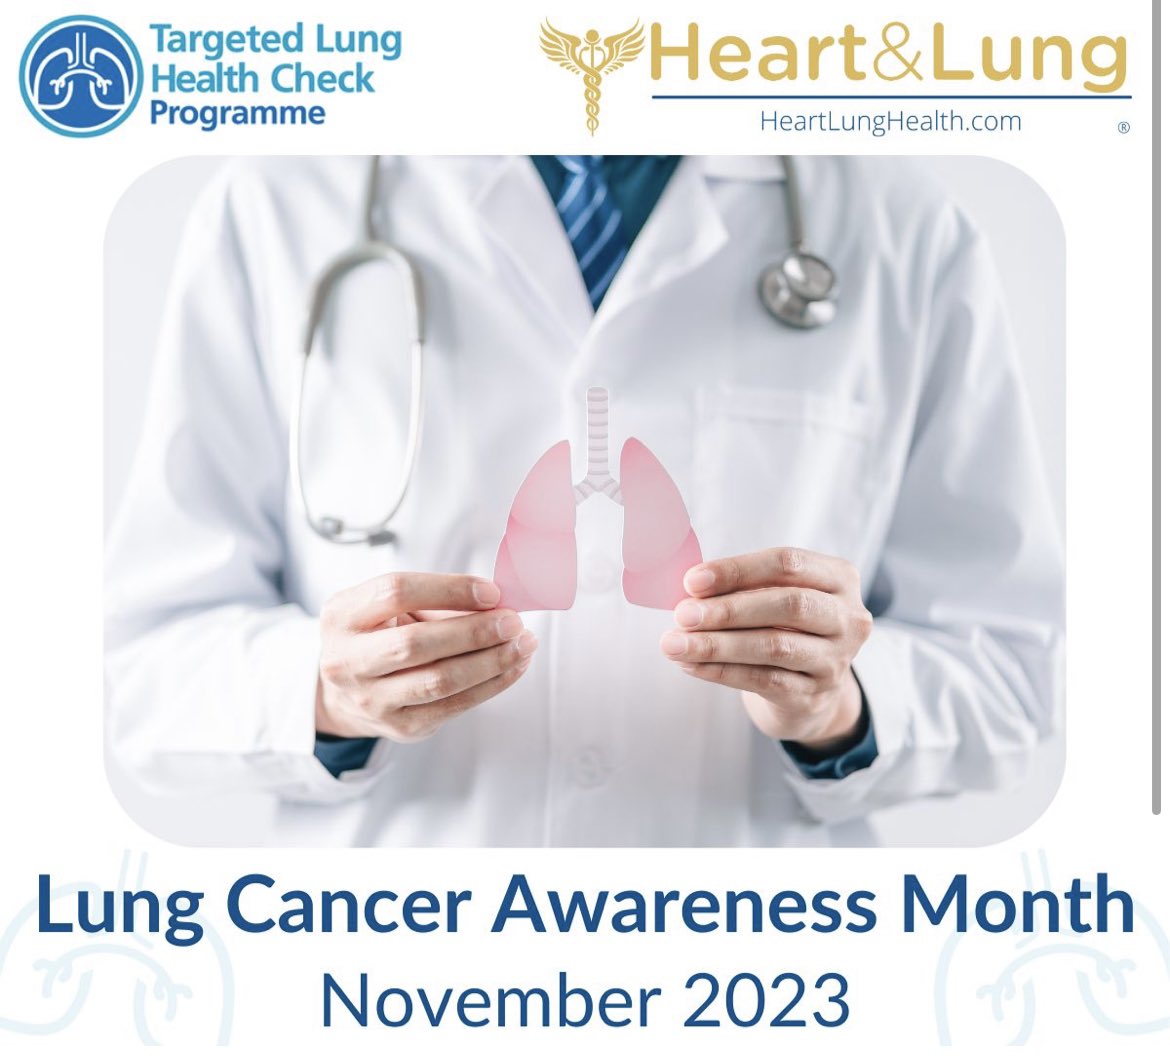 This Lung Cancer Awareness Month, it has been uplifting to start to see people with early stage Lung cancers diagnosed through the national screening programme coming into clinics! #earlydiagnosissaveslives #LungCancerAwarenessMonth